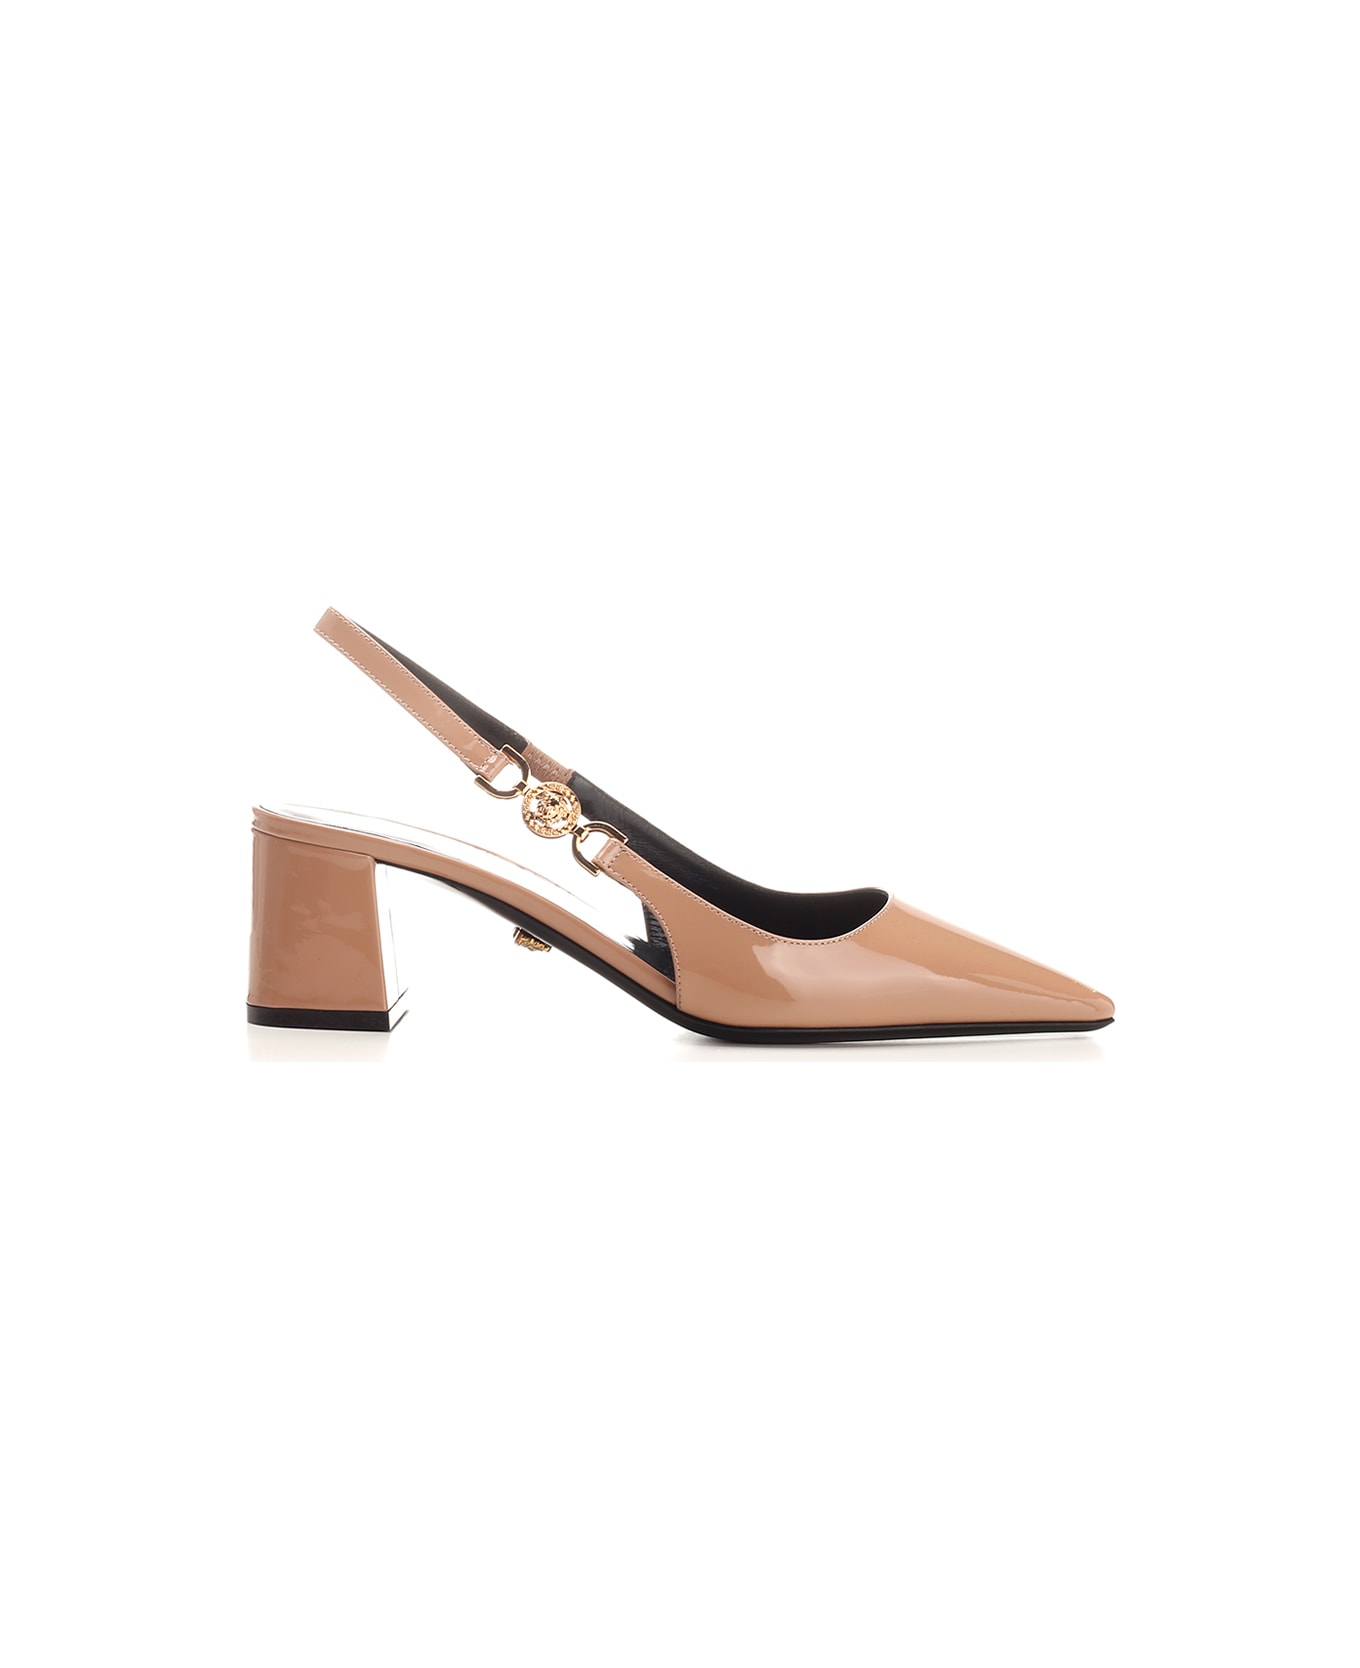 Versace Patent Leather Sling Back - Beige